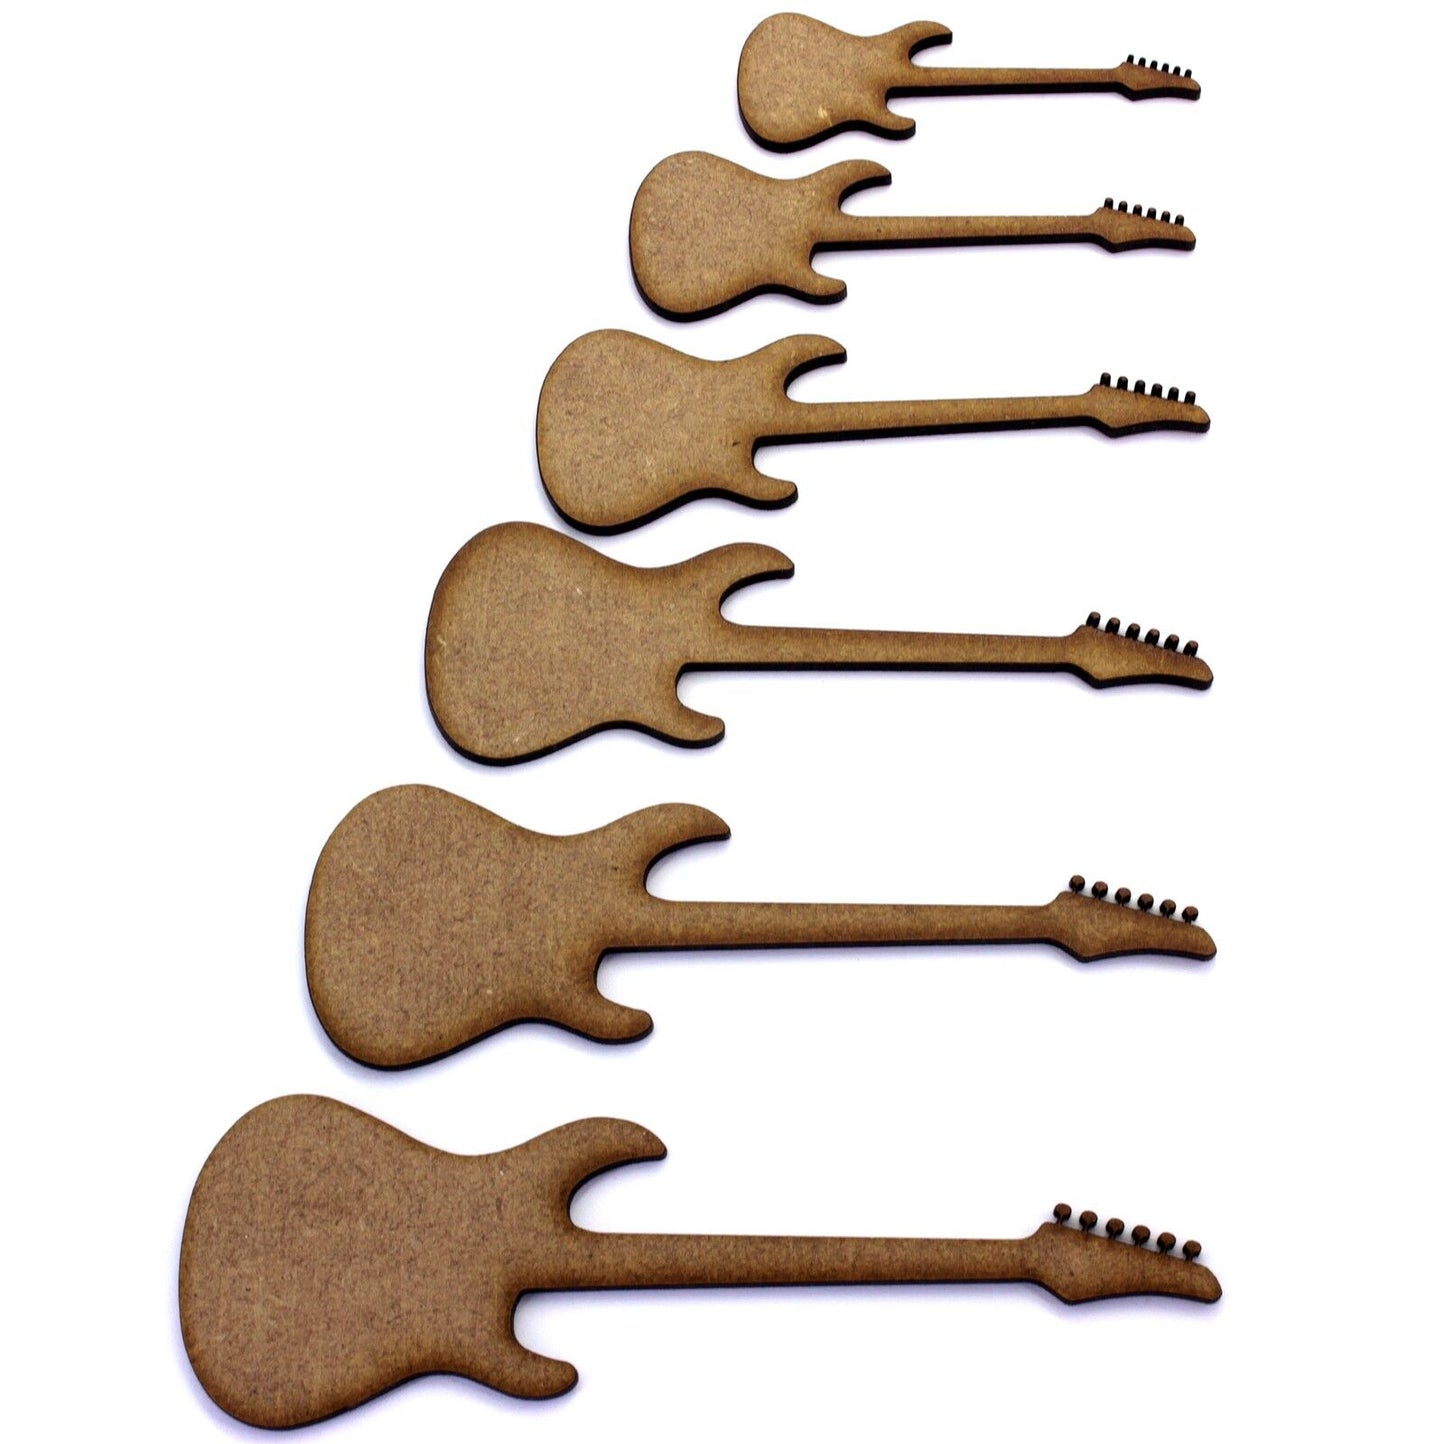 Electric Guitar Craft Shapes. Various Sizes 50mm - 200mm. 2mm MDF Wood